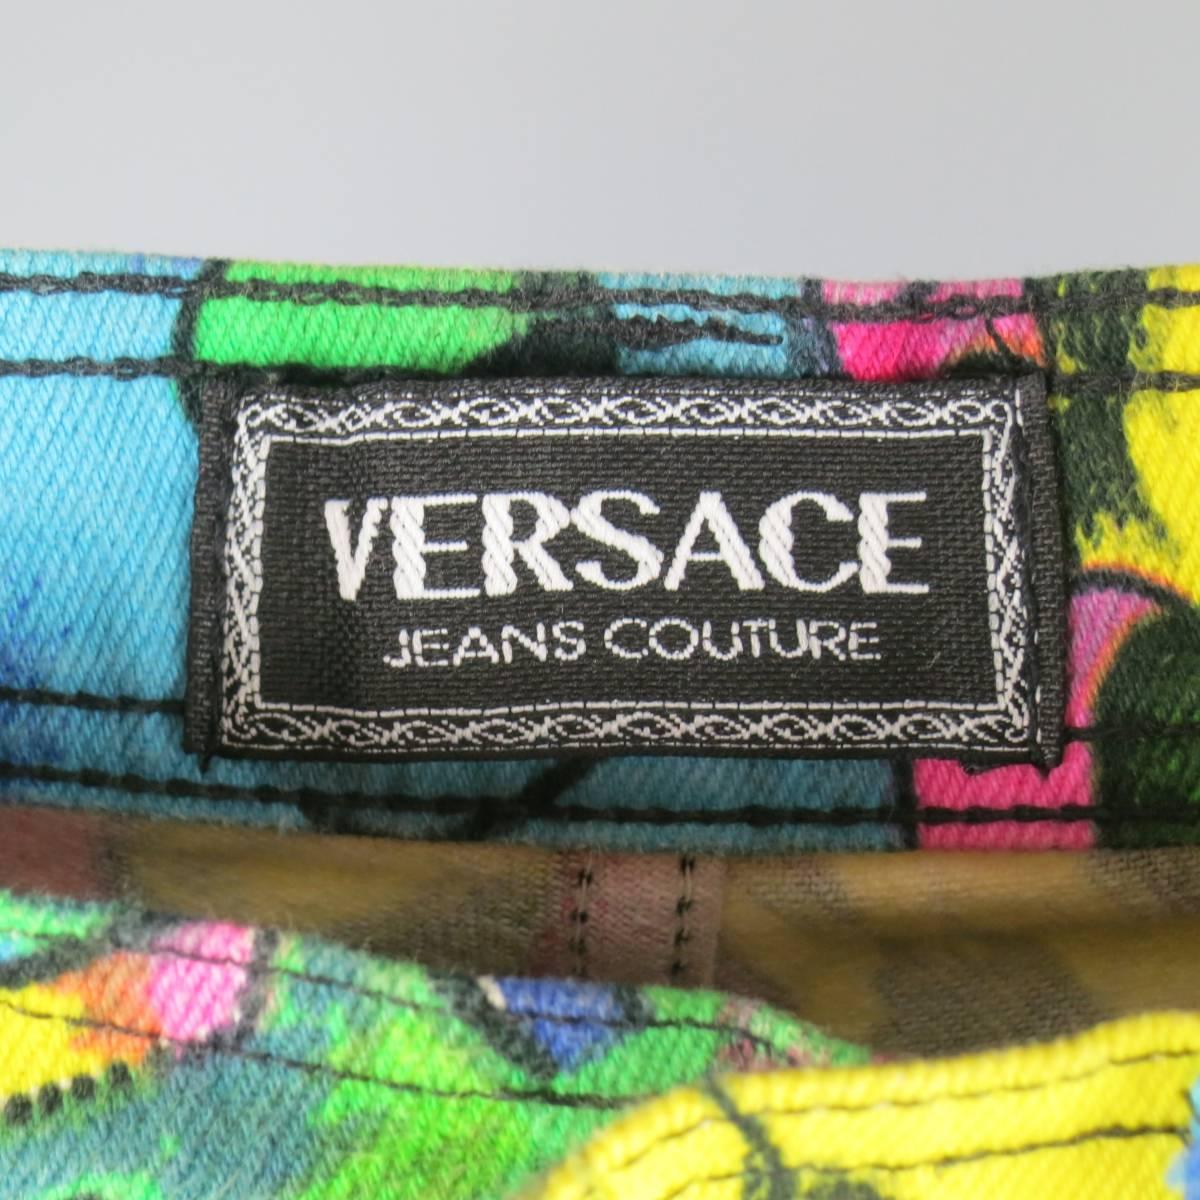 GIANNI VERSACE Jeans COUTURE 6 Multi-Color Marilyn Monroe and Betty Boop Jeans 2